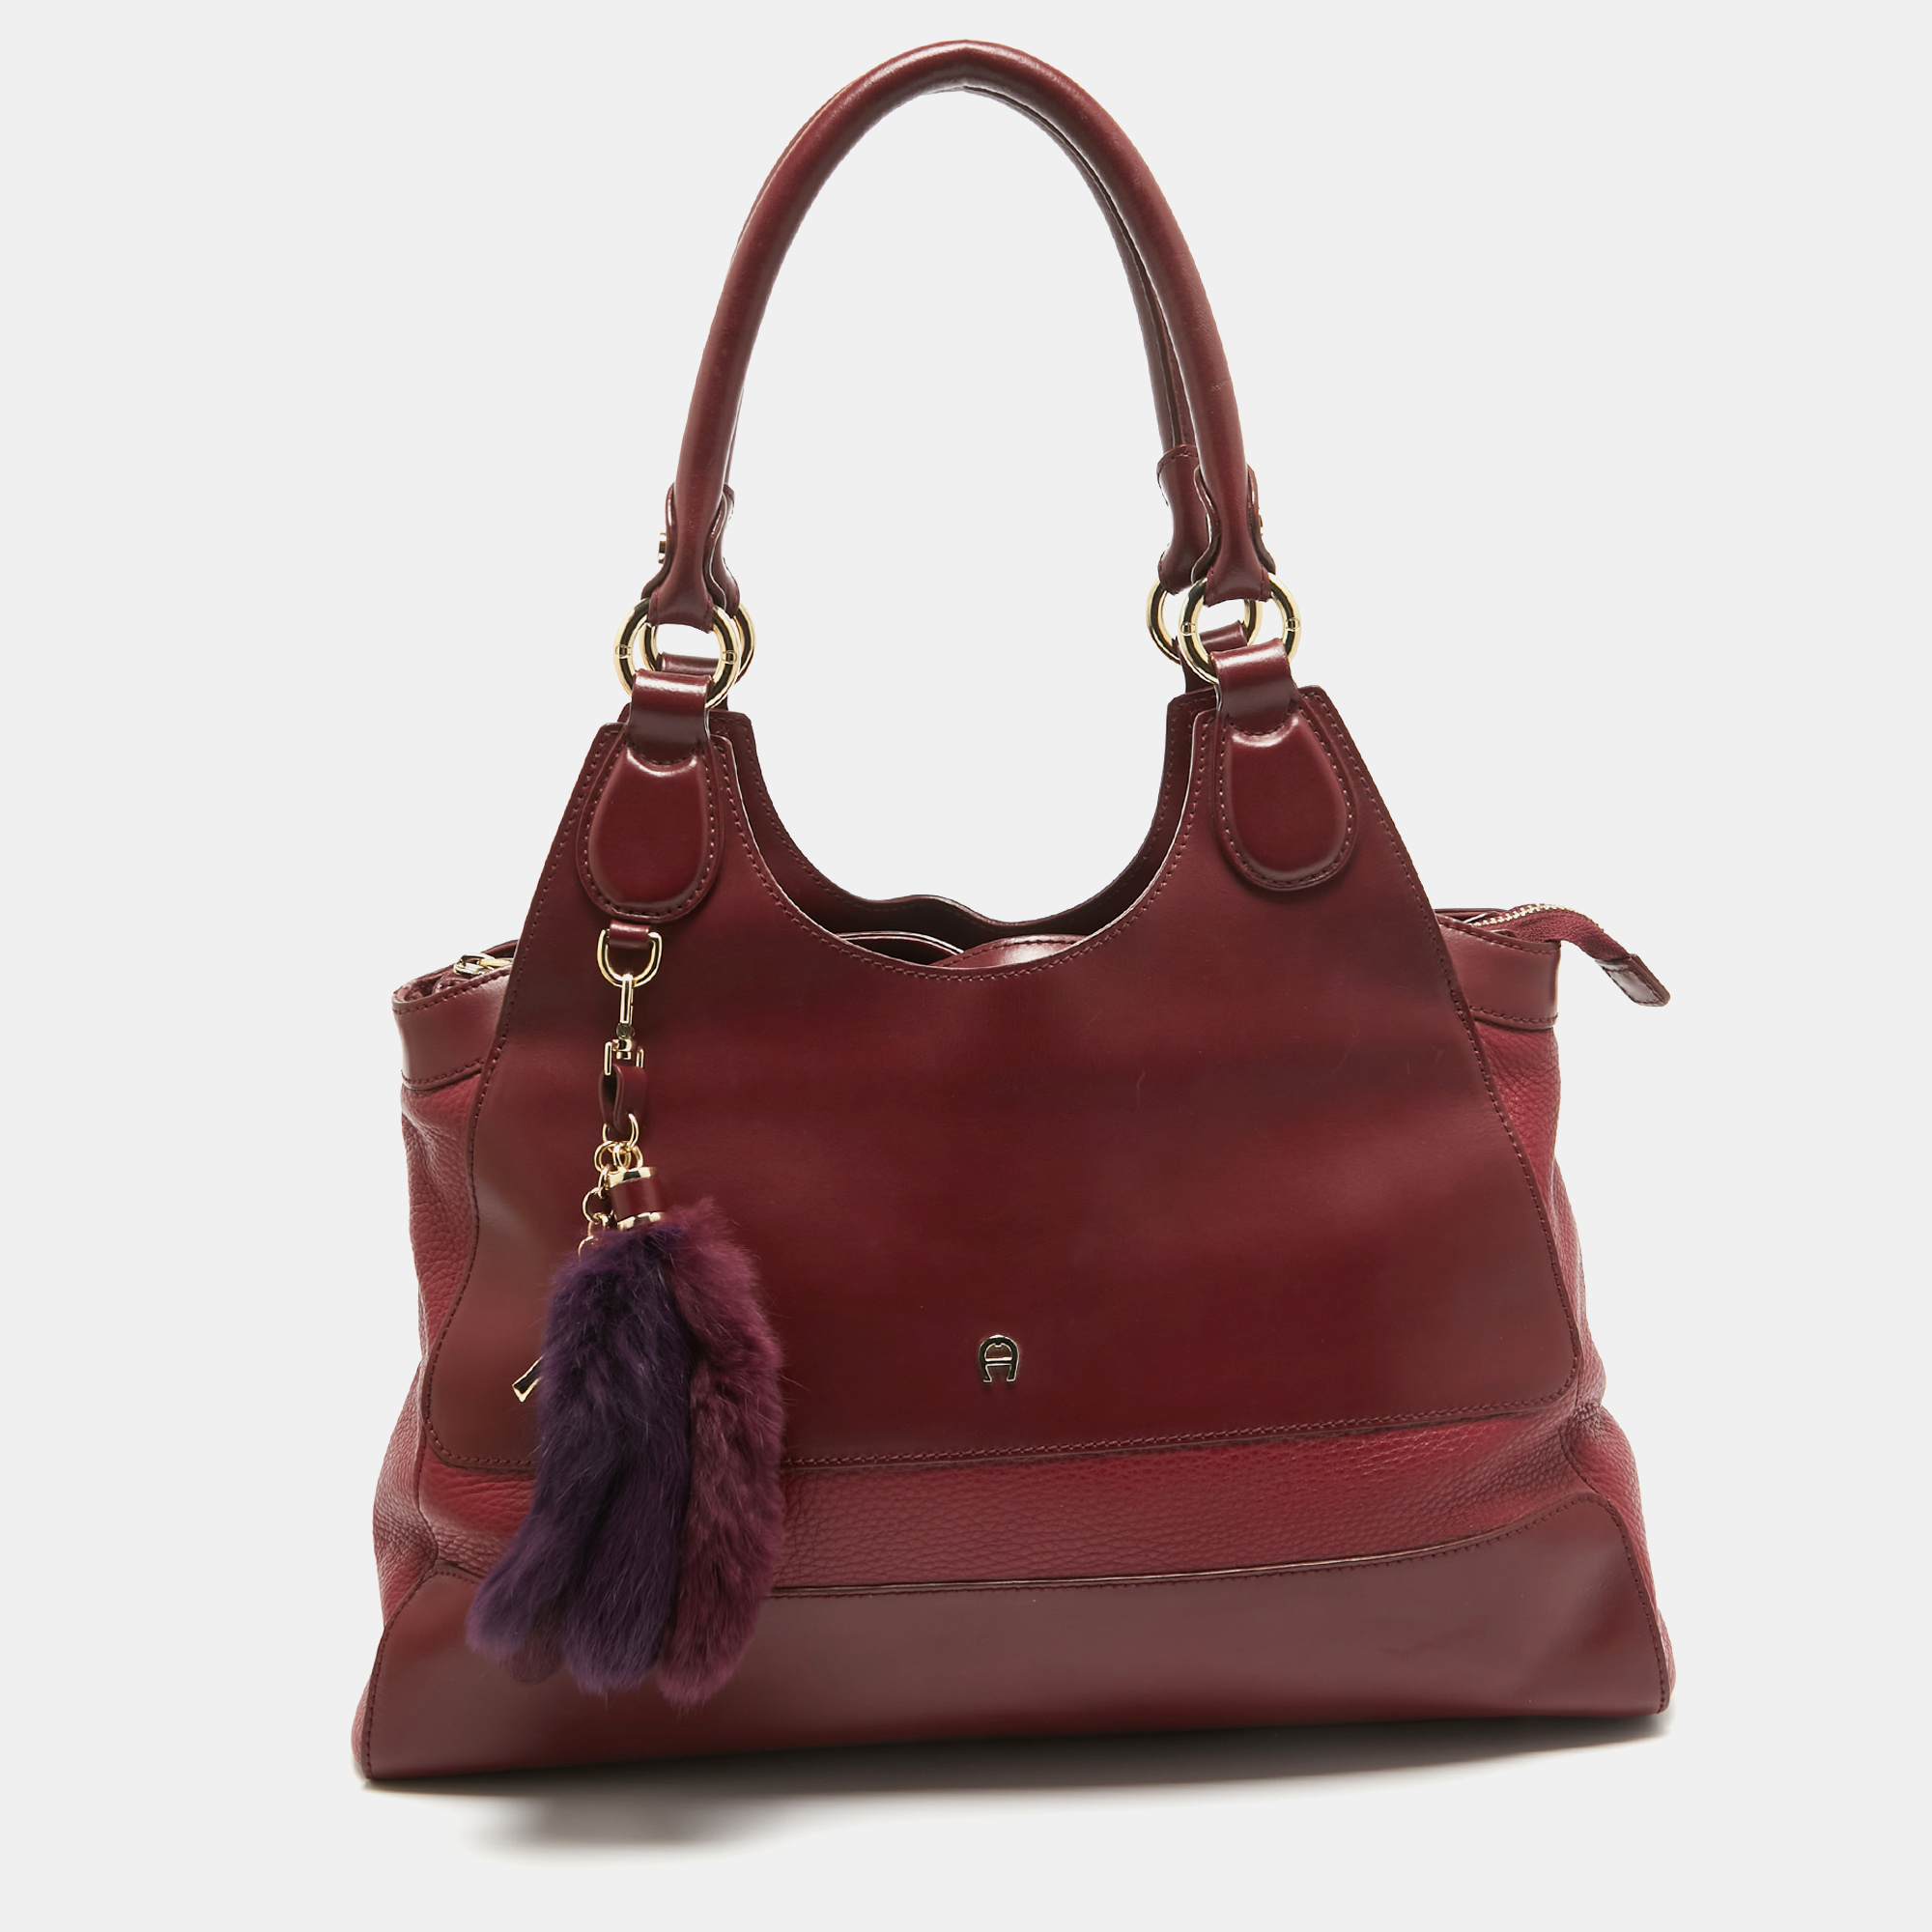 Created from high quality materials this Aigner tote is enriched with functional and classic elements. It can be carried around conveniently and its interior is perfectly sized to keep your belongings with ease.